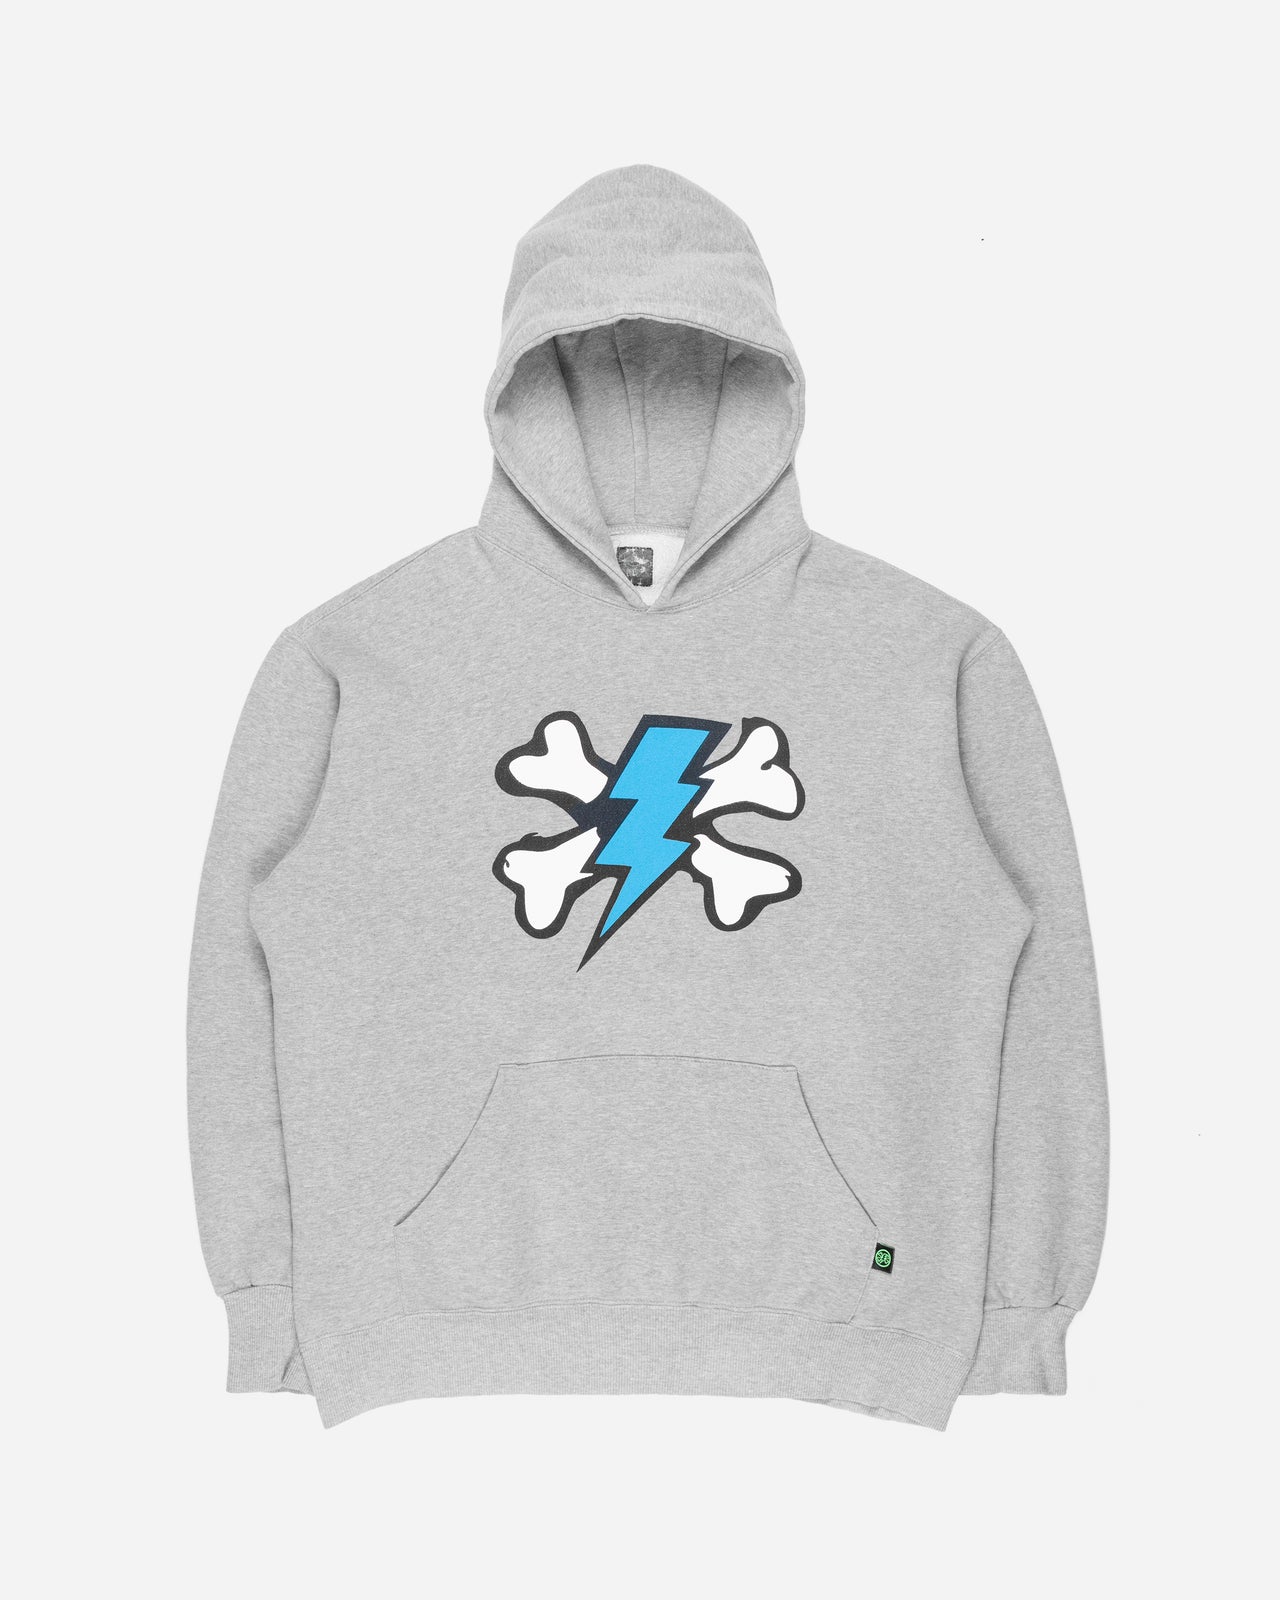 Undercover “Chaotic Mutant” Hoodie - SS01 “Chaotic Discord”